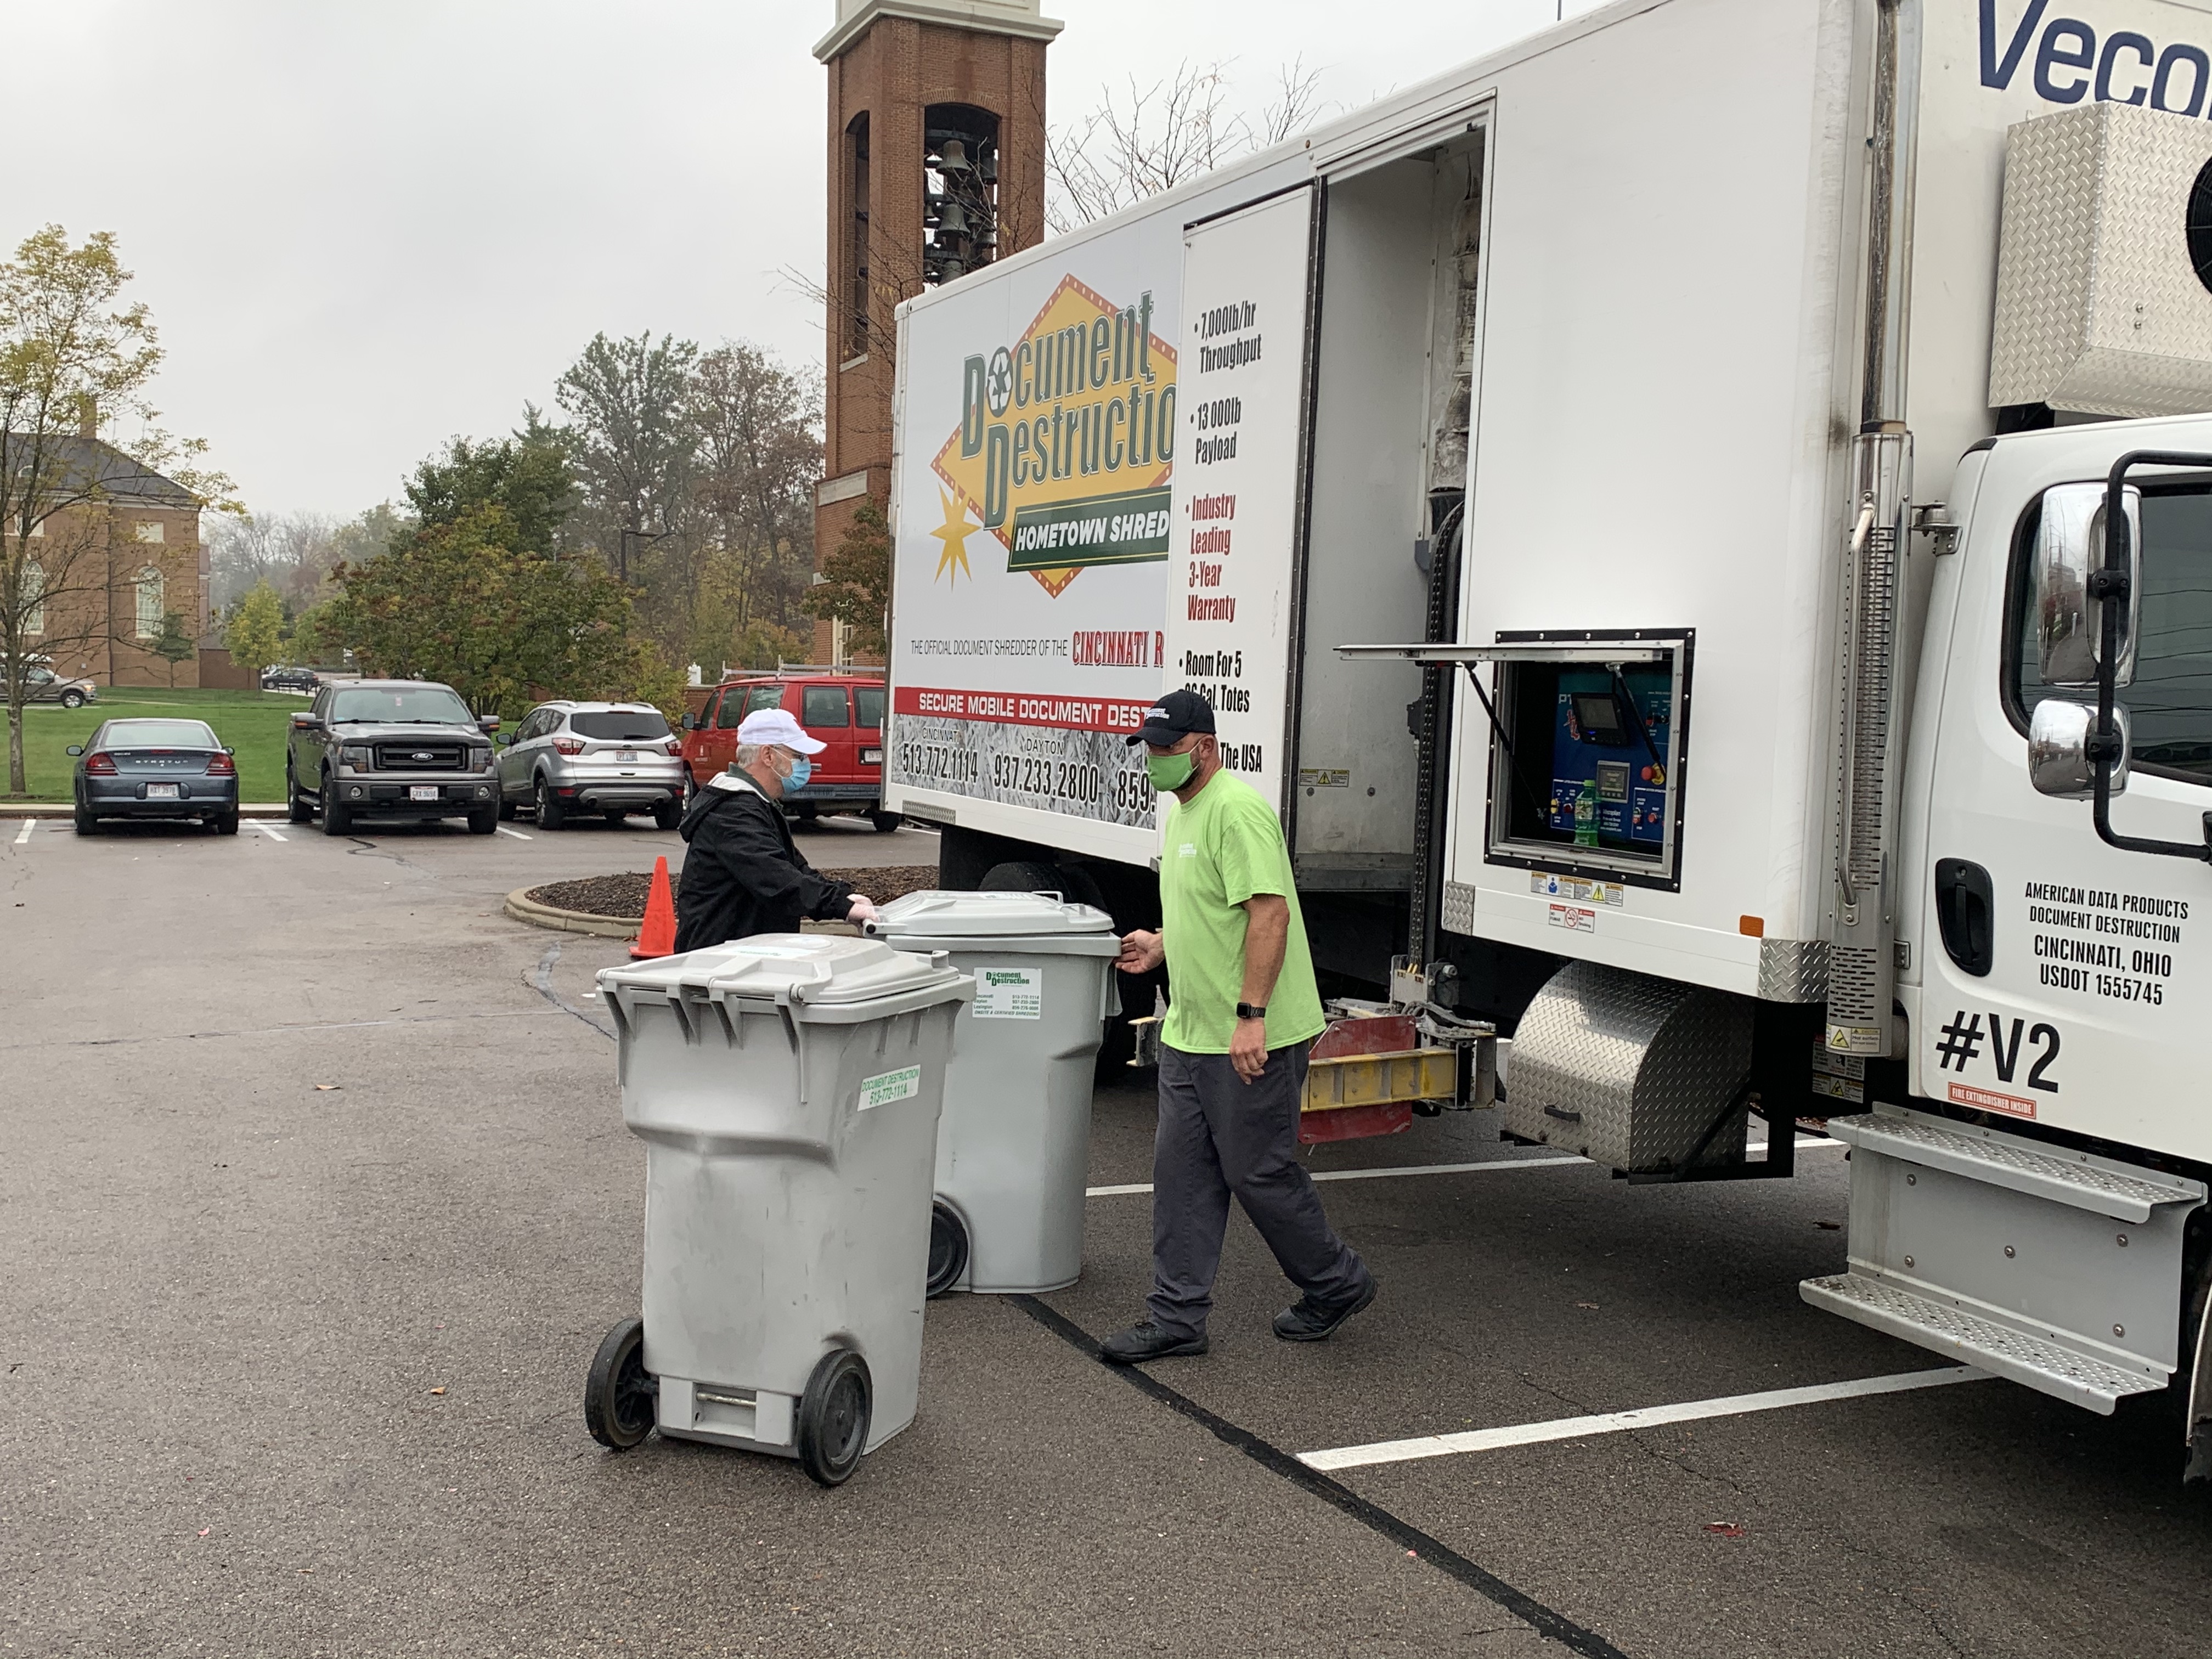 Shredding truck at Cook Field on Oxford campus in October, 2020